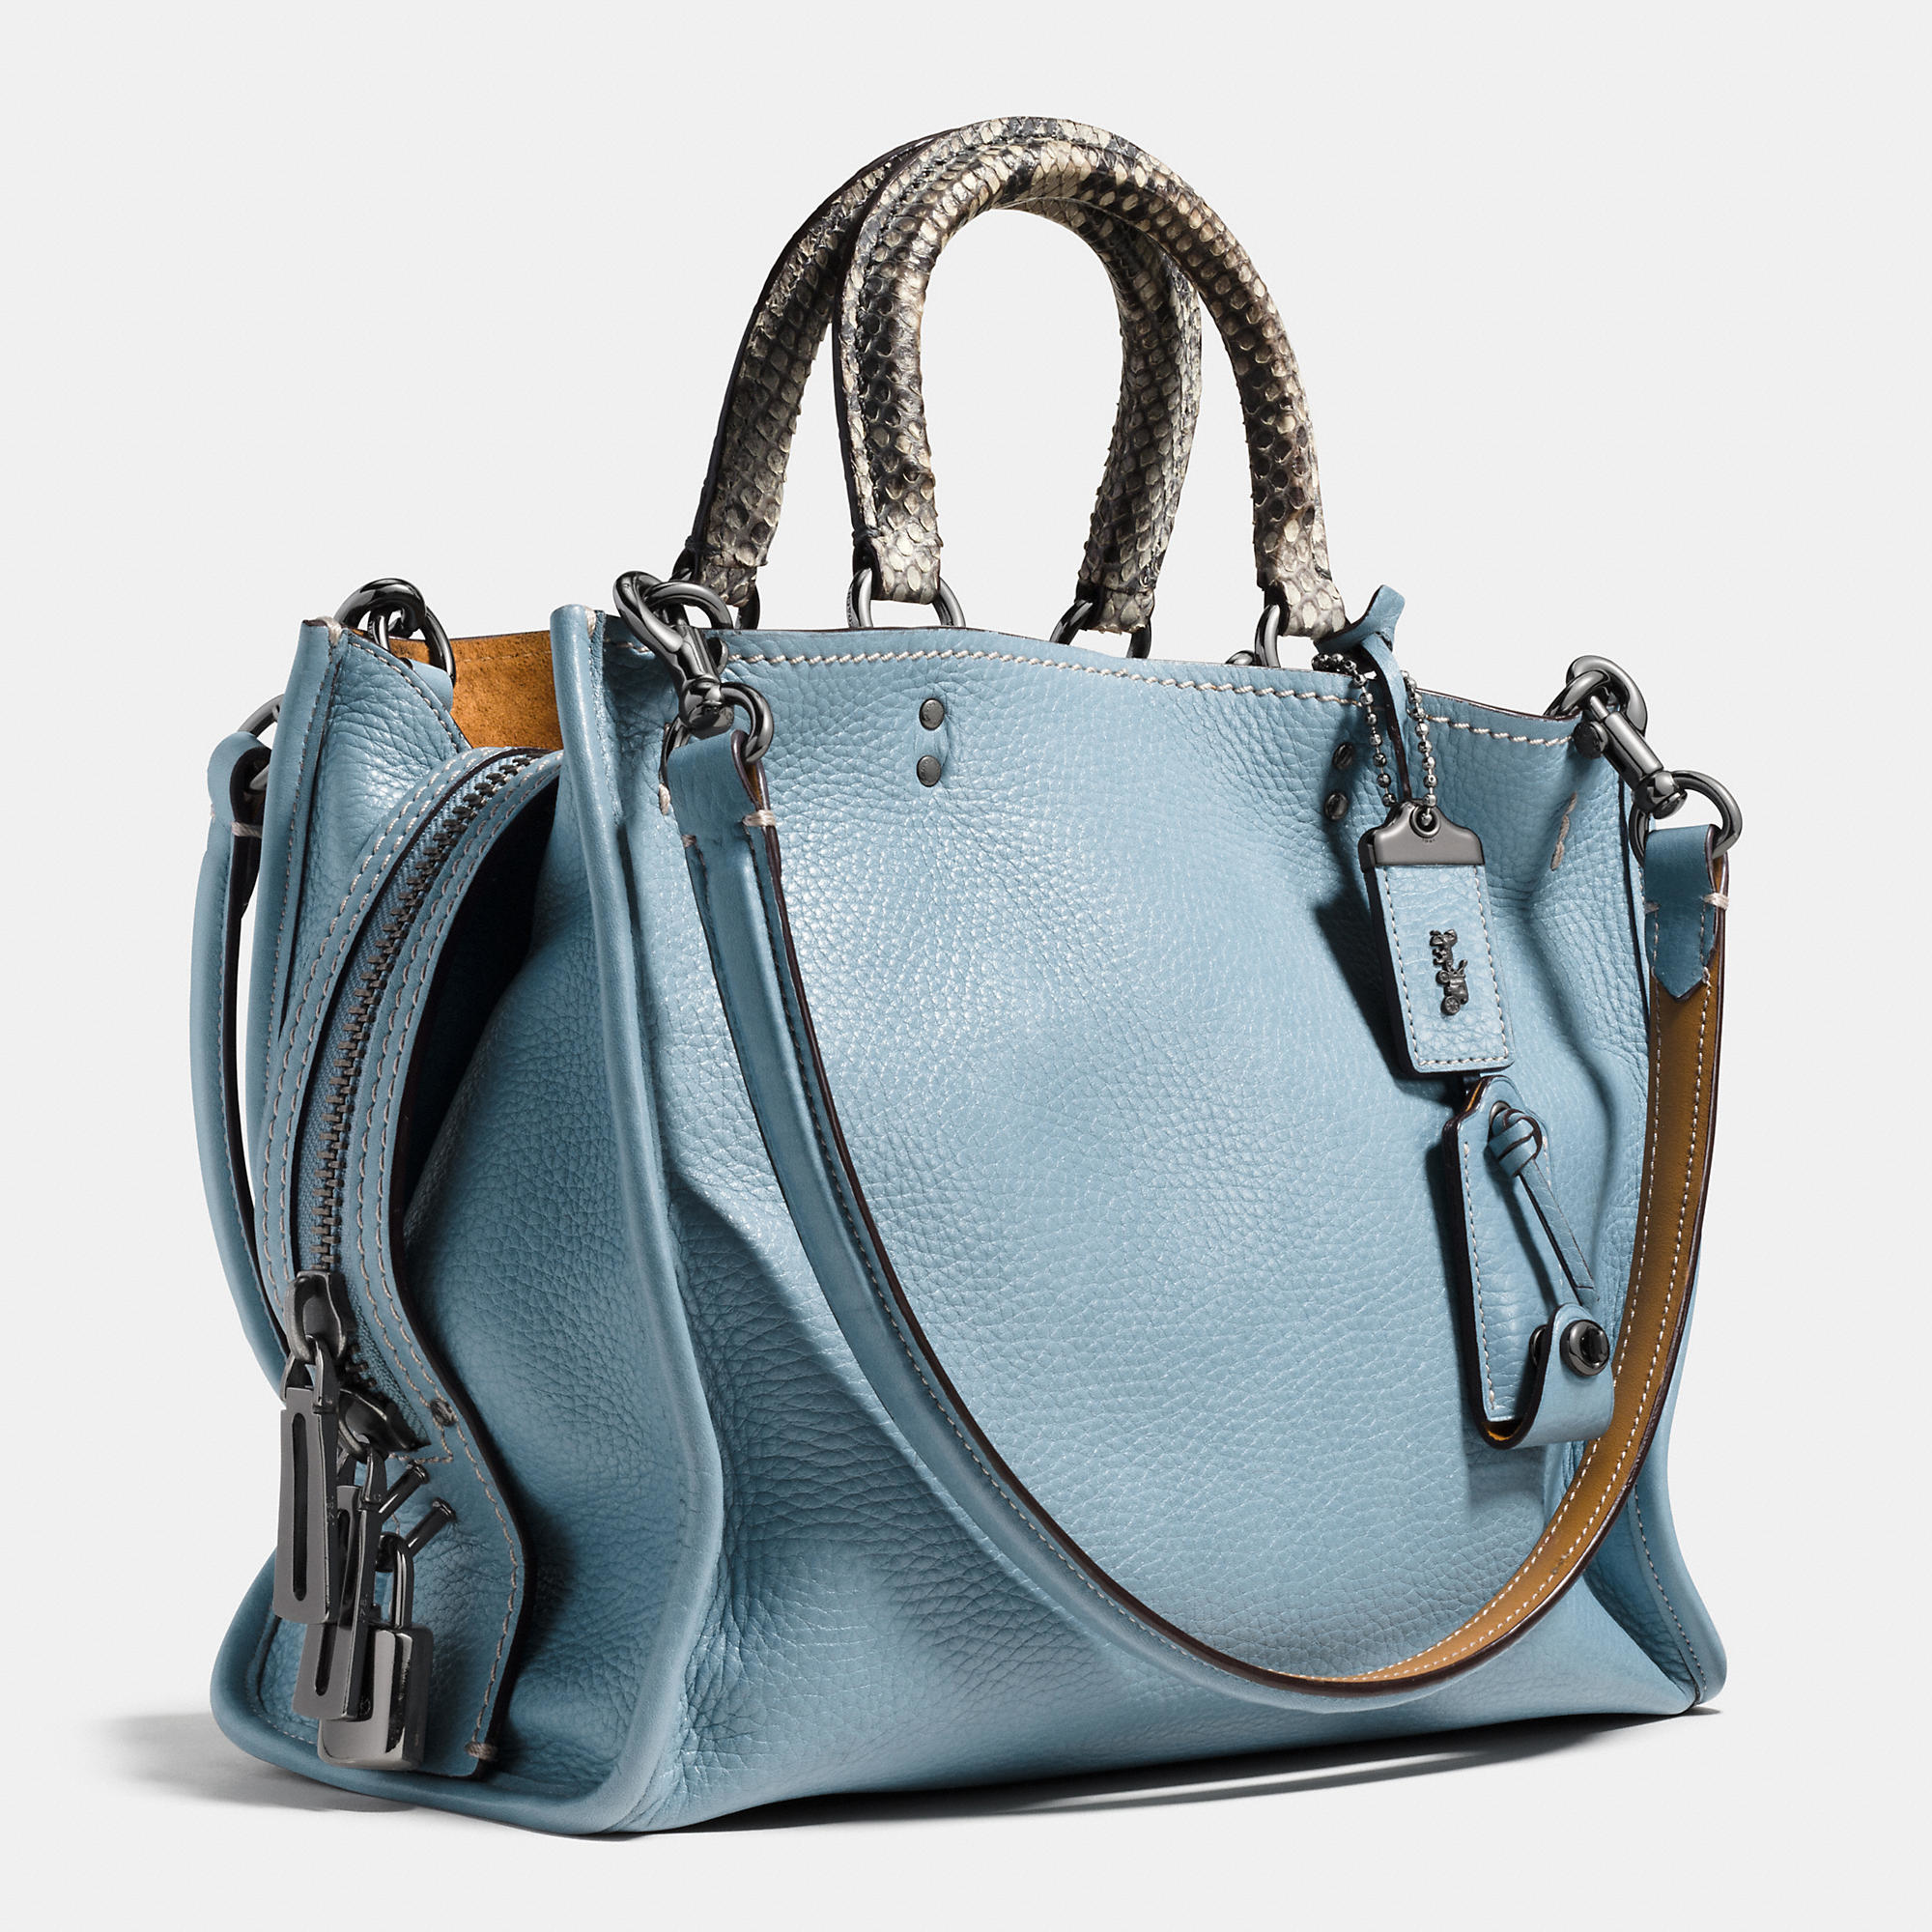 COACH Leather Rogue Bag In Colorblock Python in Blue Lyst